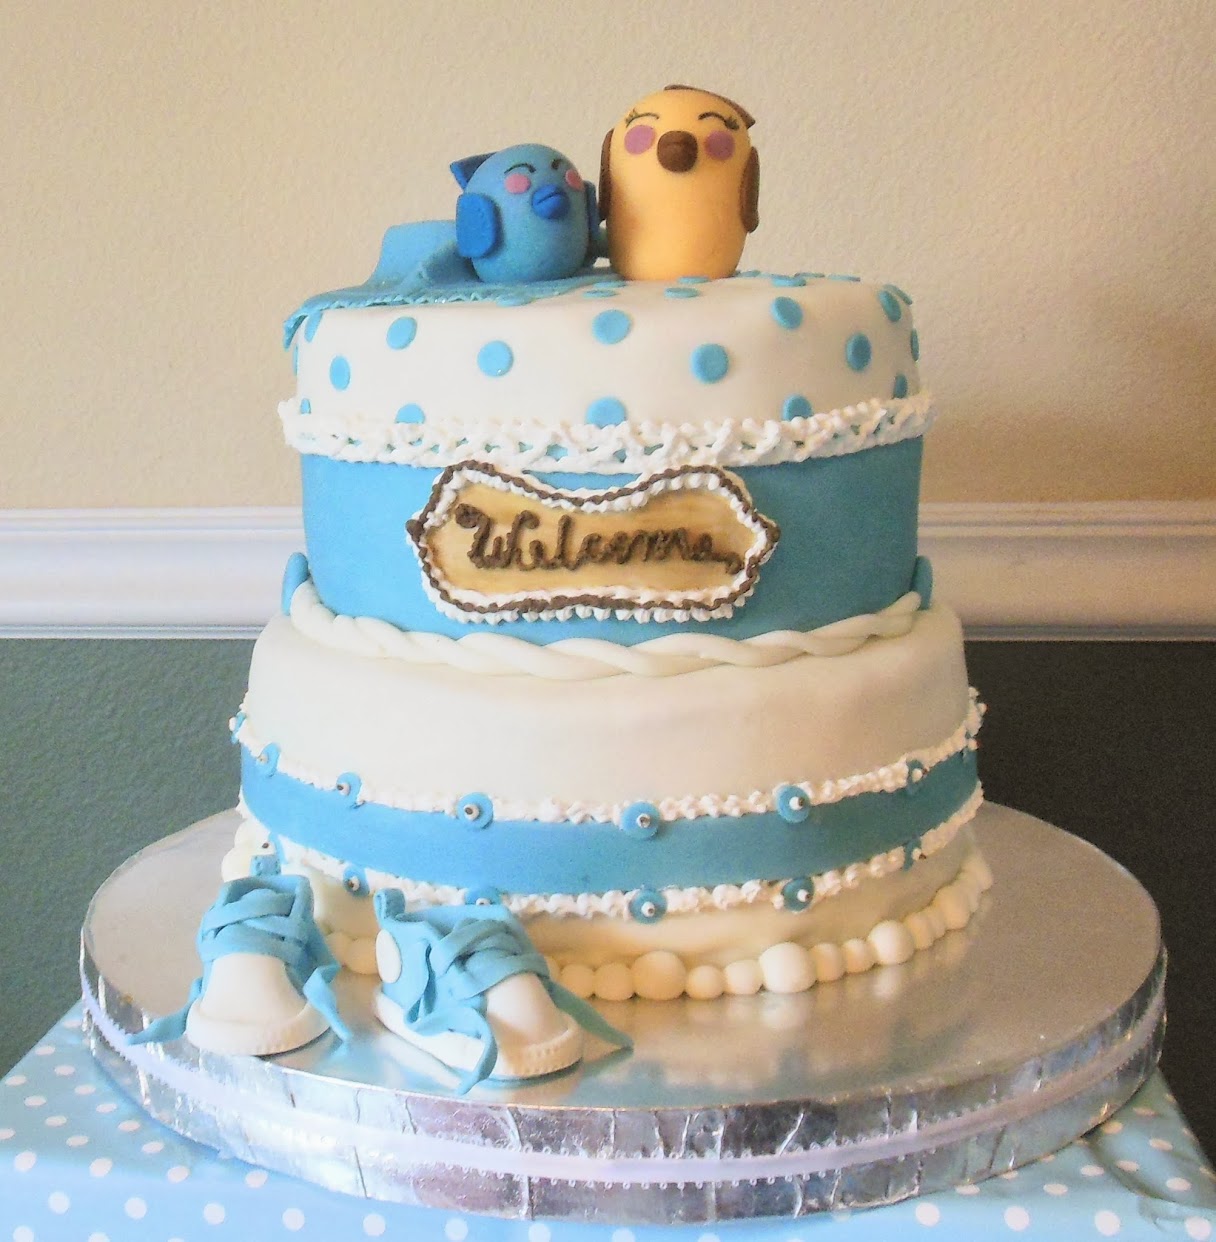 Trends for Images: Baby shower themes